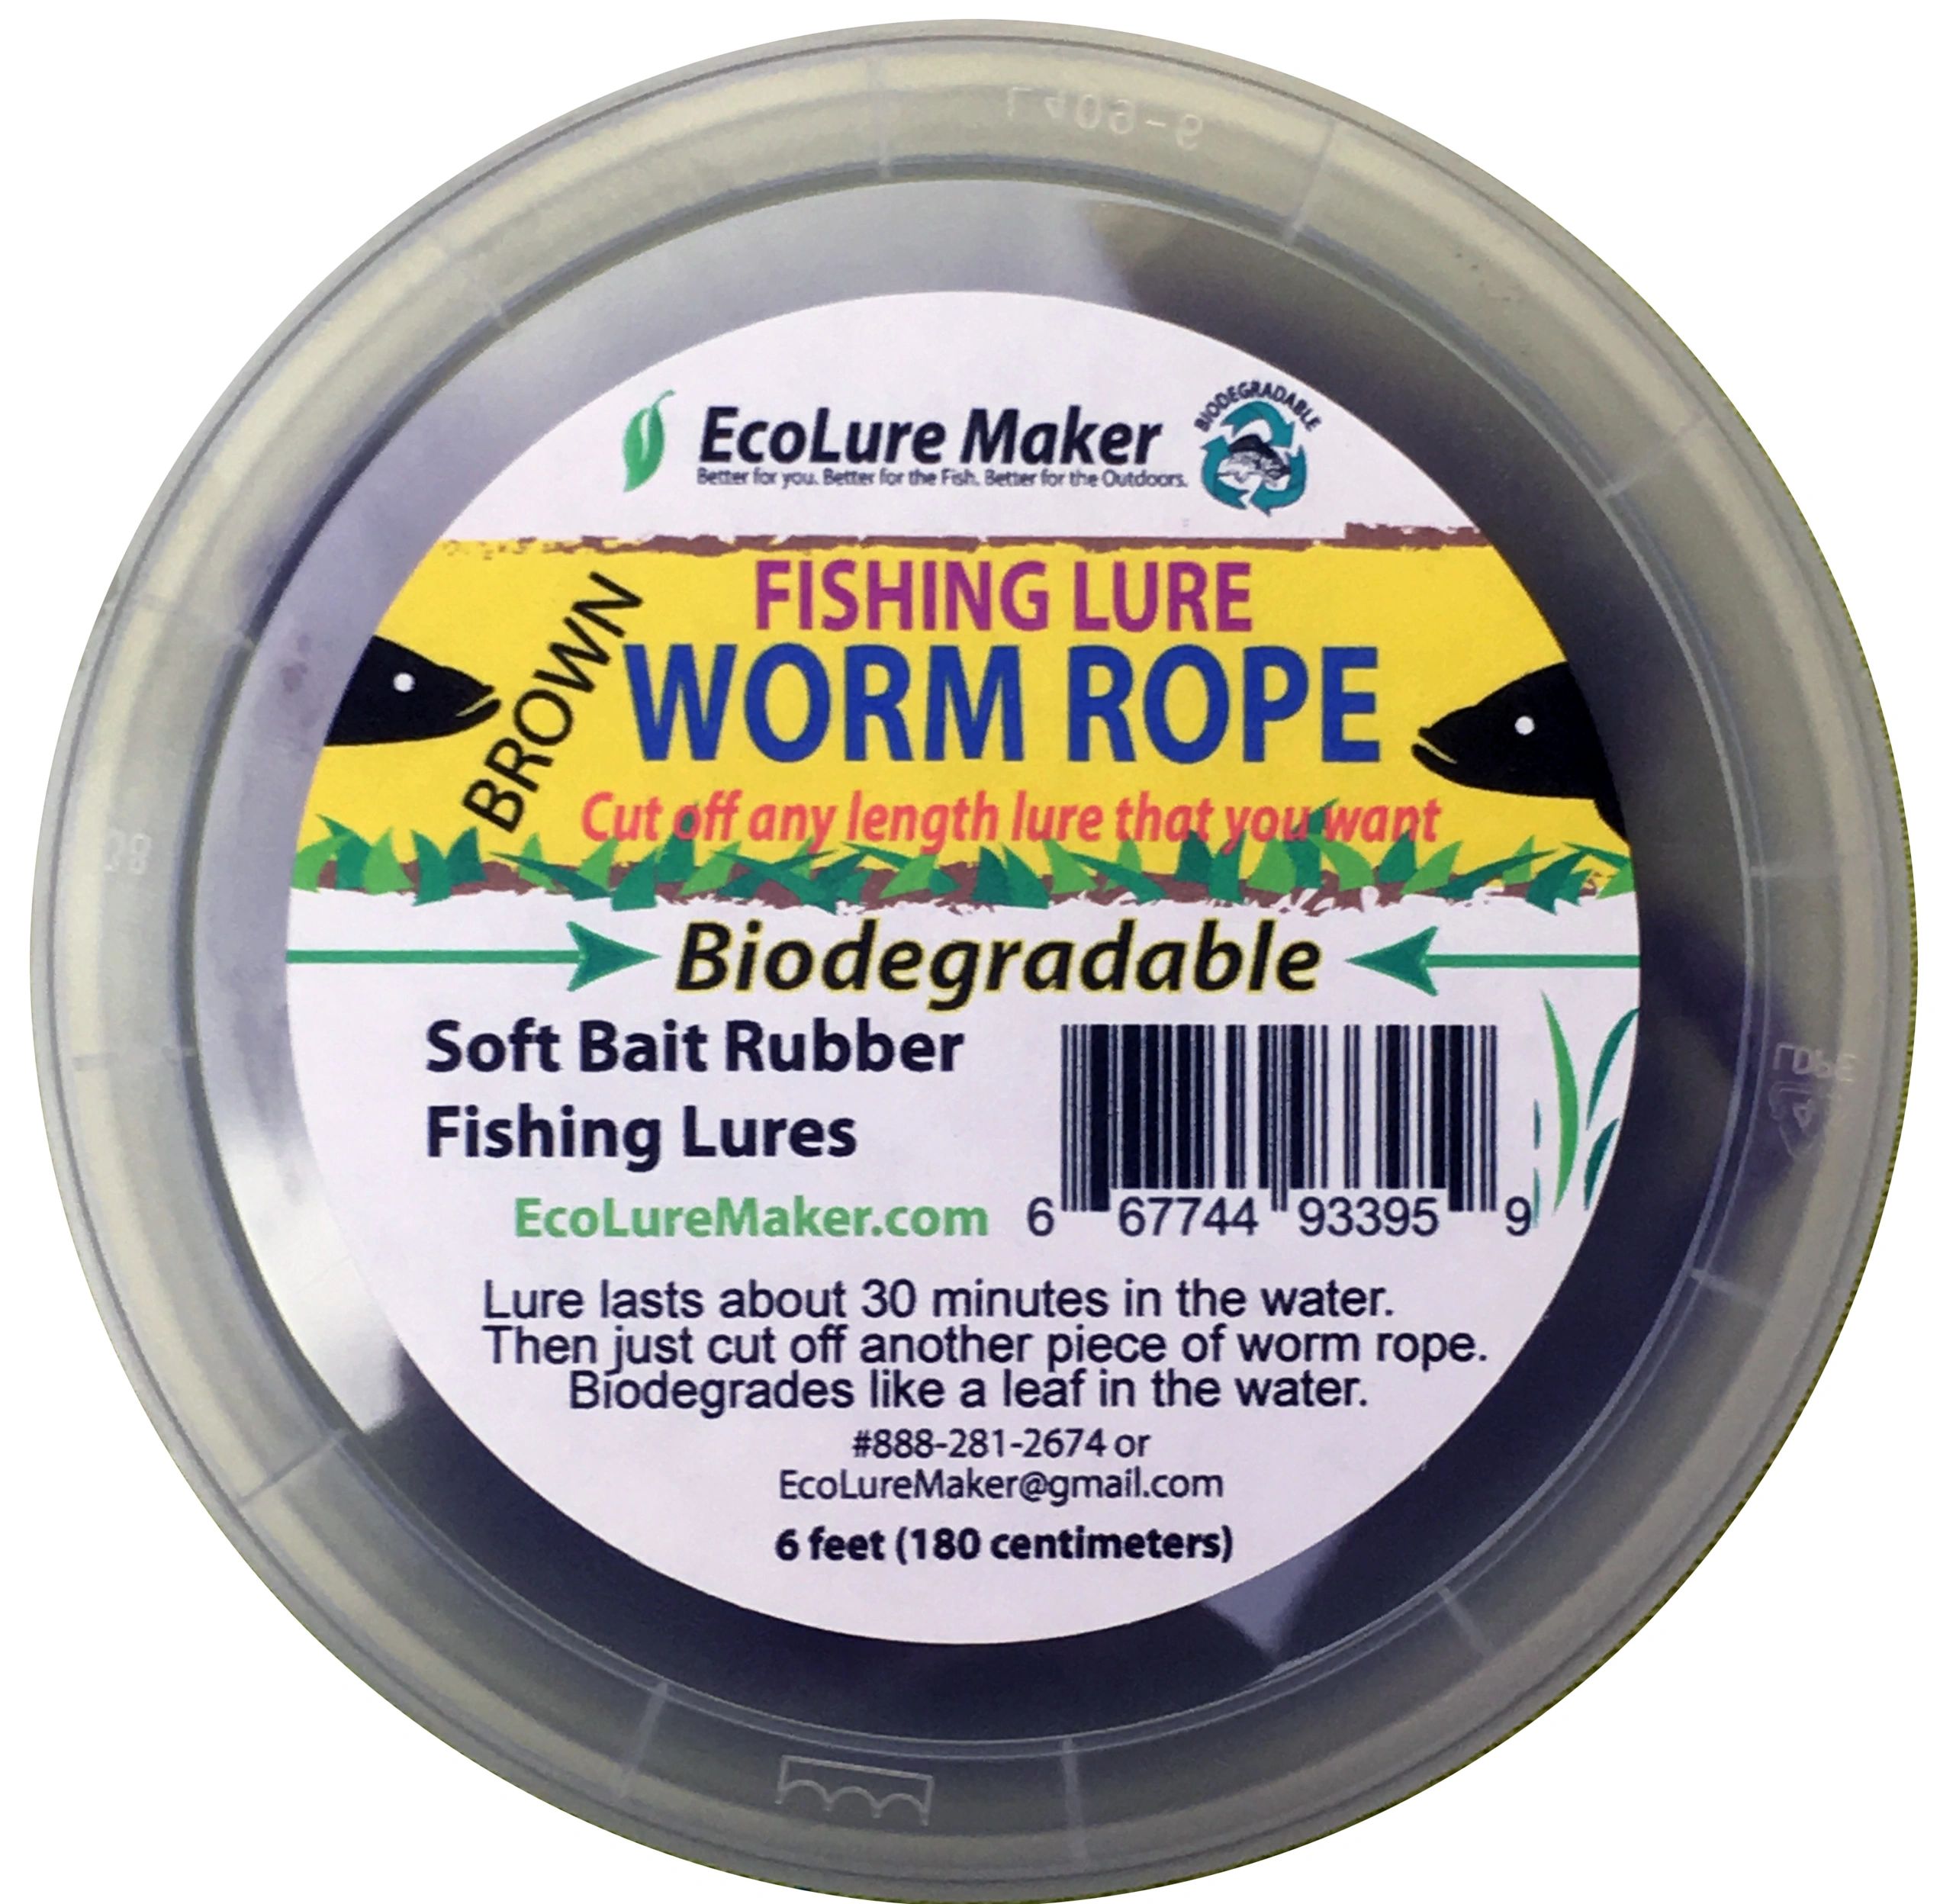 Biodegradable Fishing Lure Worm Rope